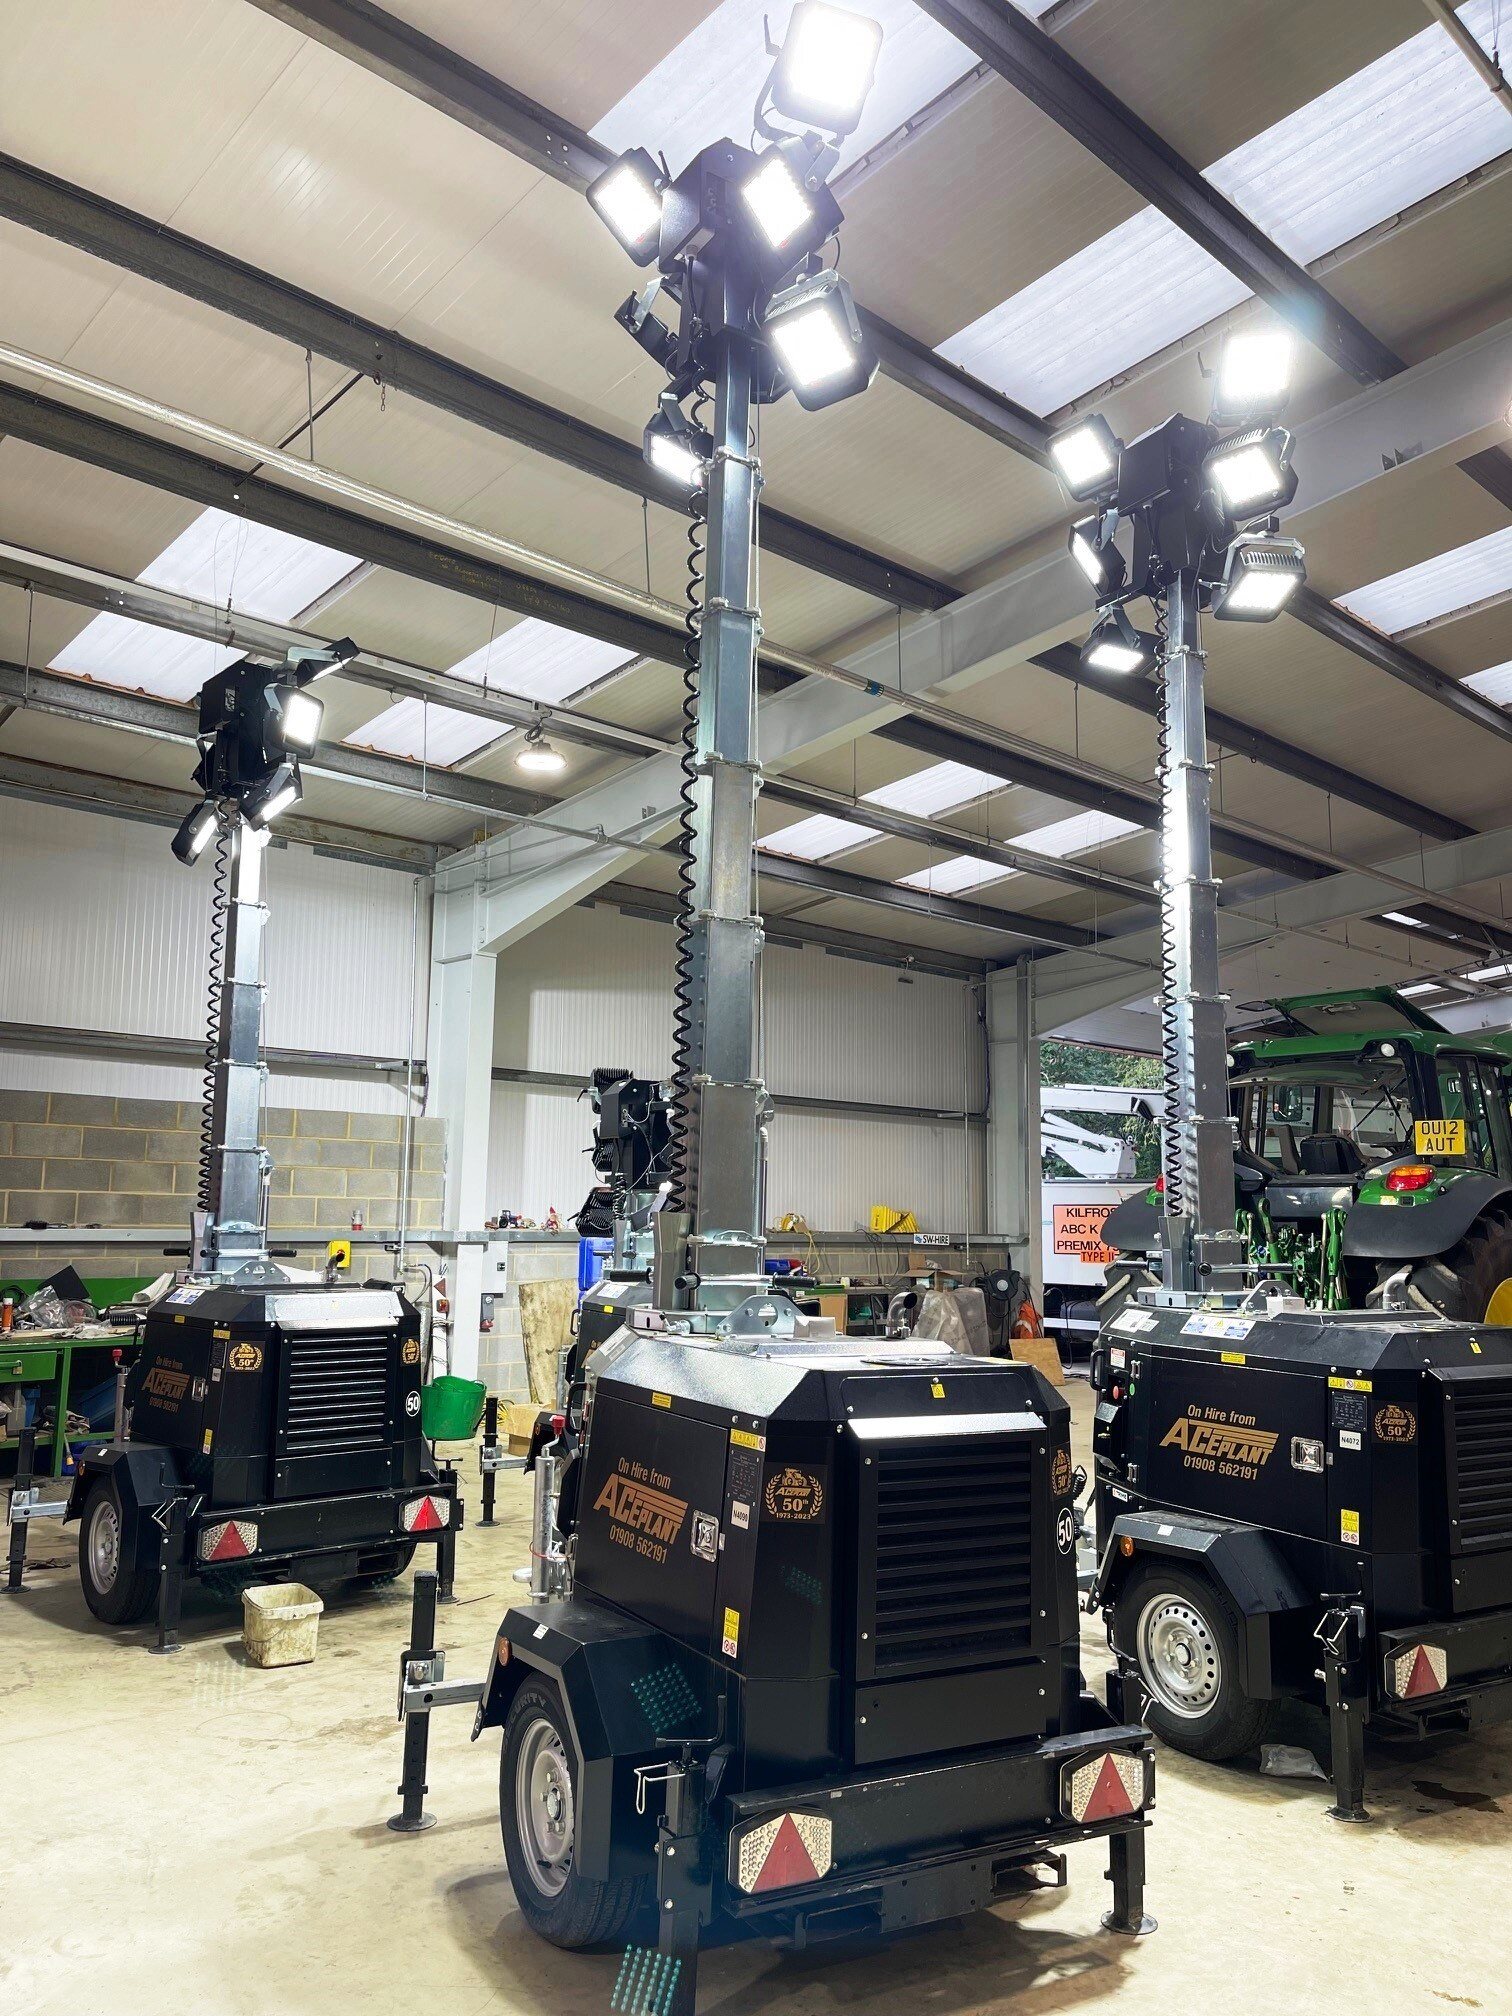 Buckinghamshire’s ACE Plant add more of our lighting towers